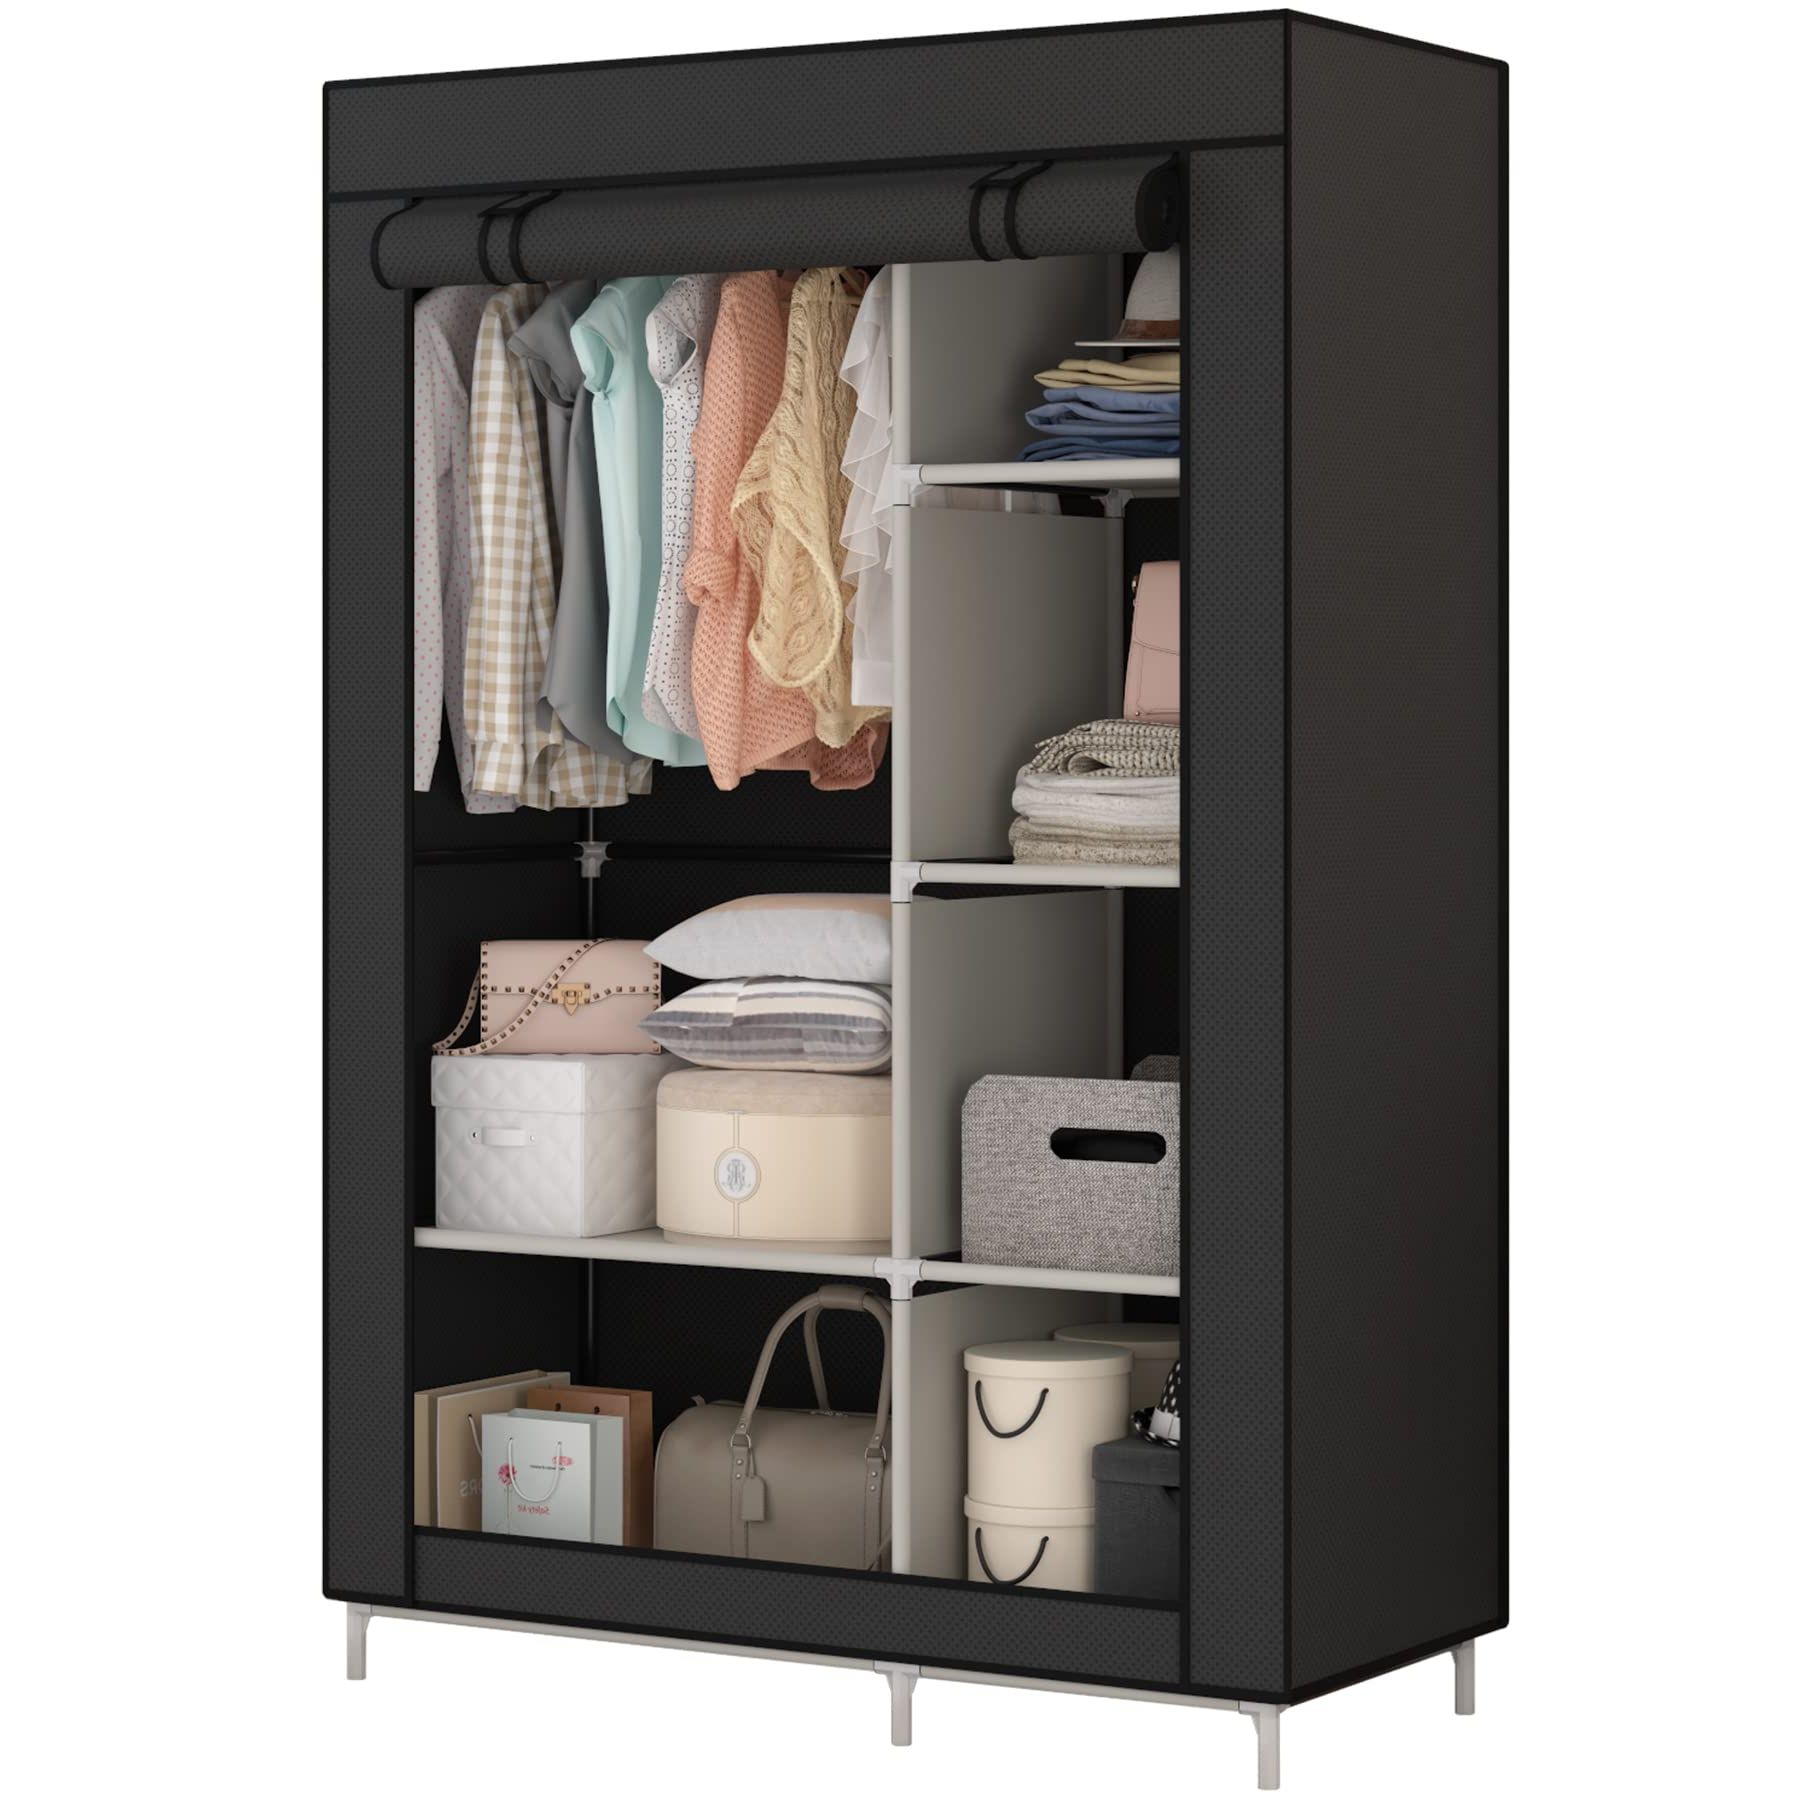 Latest Amazon: Calmootey Closet Storage Organizer,portable Wardrobe With 6  Shelves And Clothes Rod,non Woven Fabric Cover With 4 Side Pockets,black :  Home & Kitchen In 6 Shelf Non Woven Wardrobes (Photo 2 of 10)